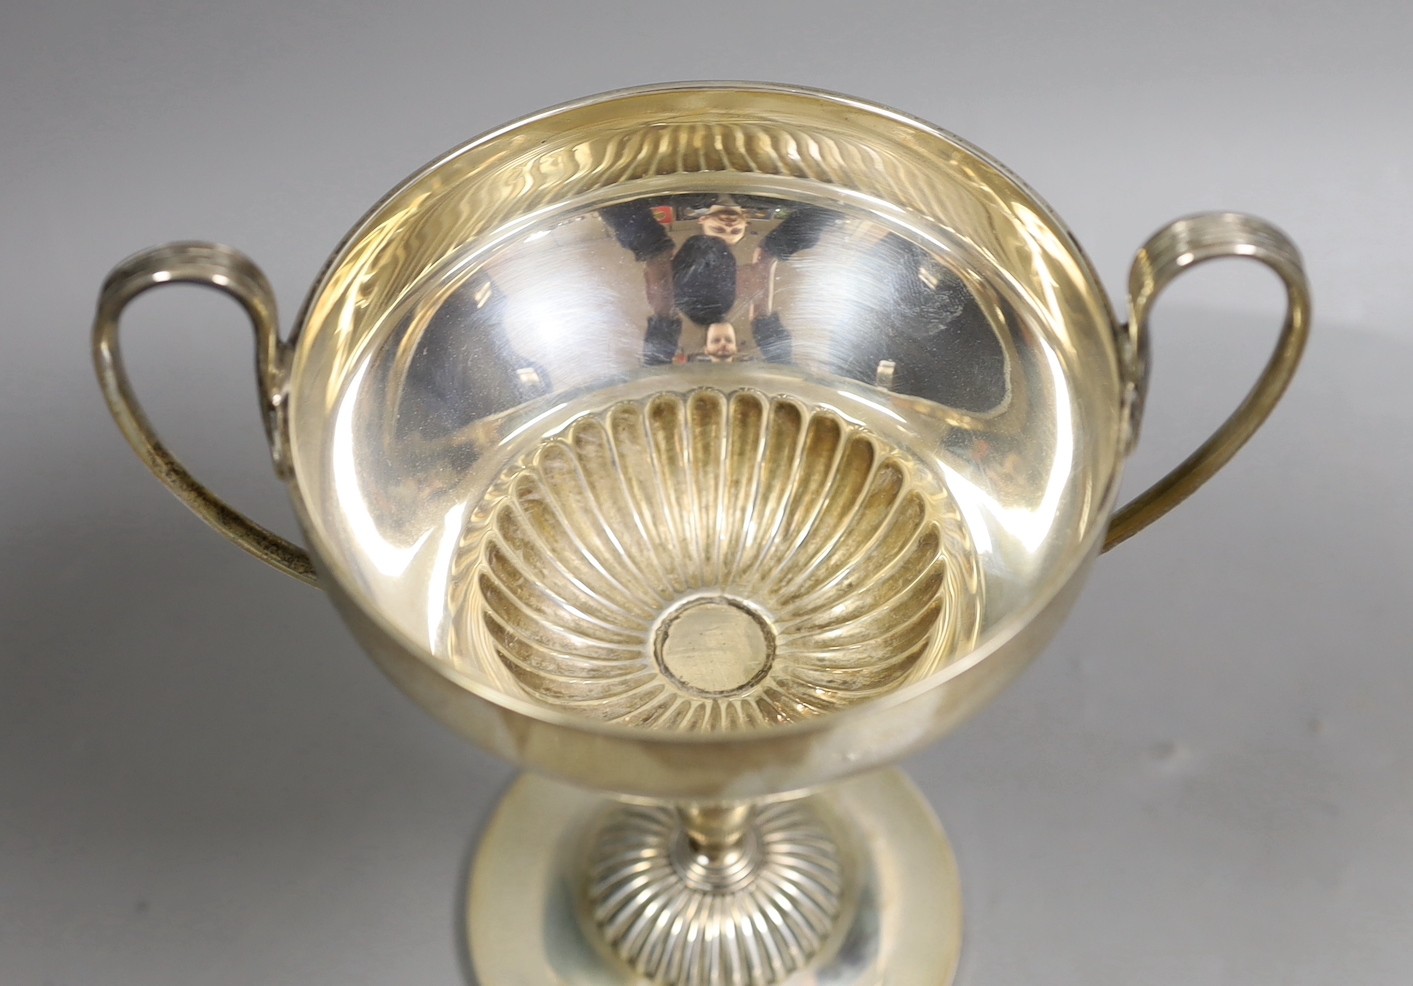 An Edwardian demi fluted silver two handled trophy cup, by Mappin & Webb, Sheffield, 1901, with later engraved horse racing inscription, height 20.1cm, 13.6oz.